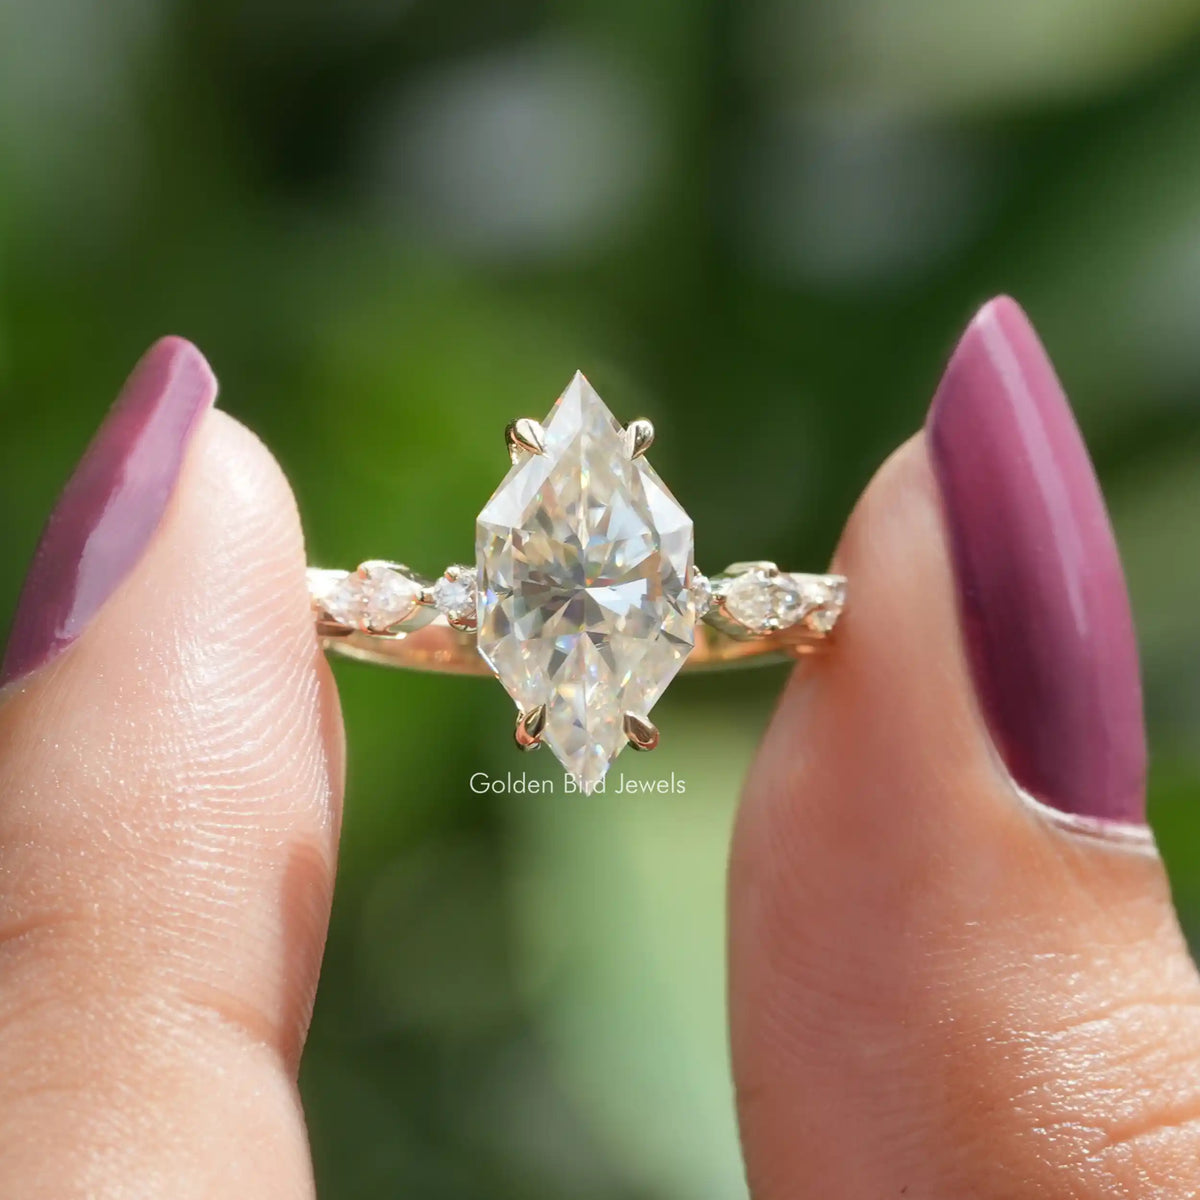 [Front view of dutch marquise cut moissanite engagement ring made of four prongs]-[Golden Bird Jewels]